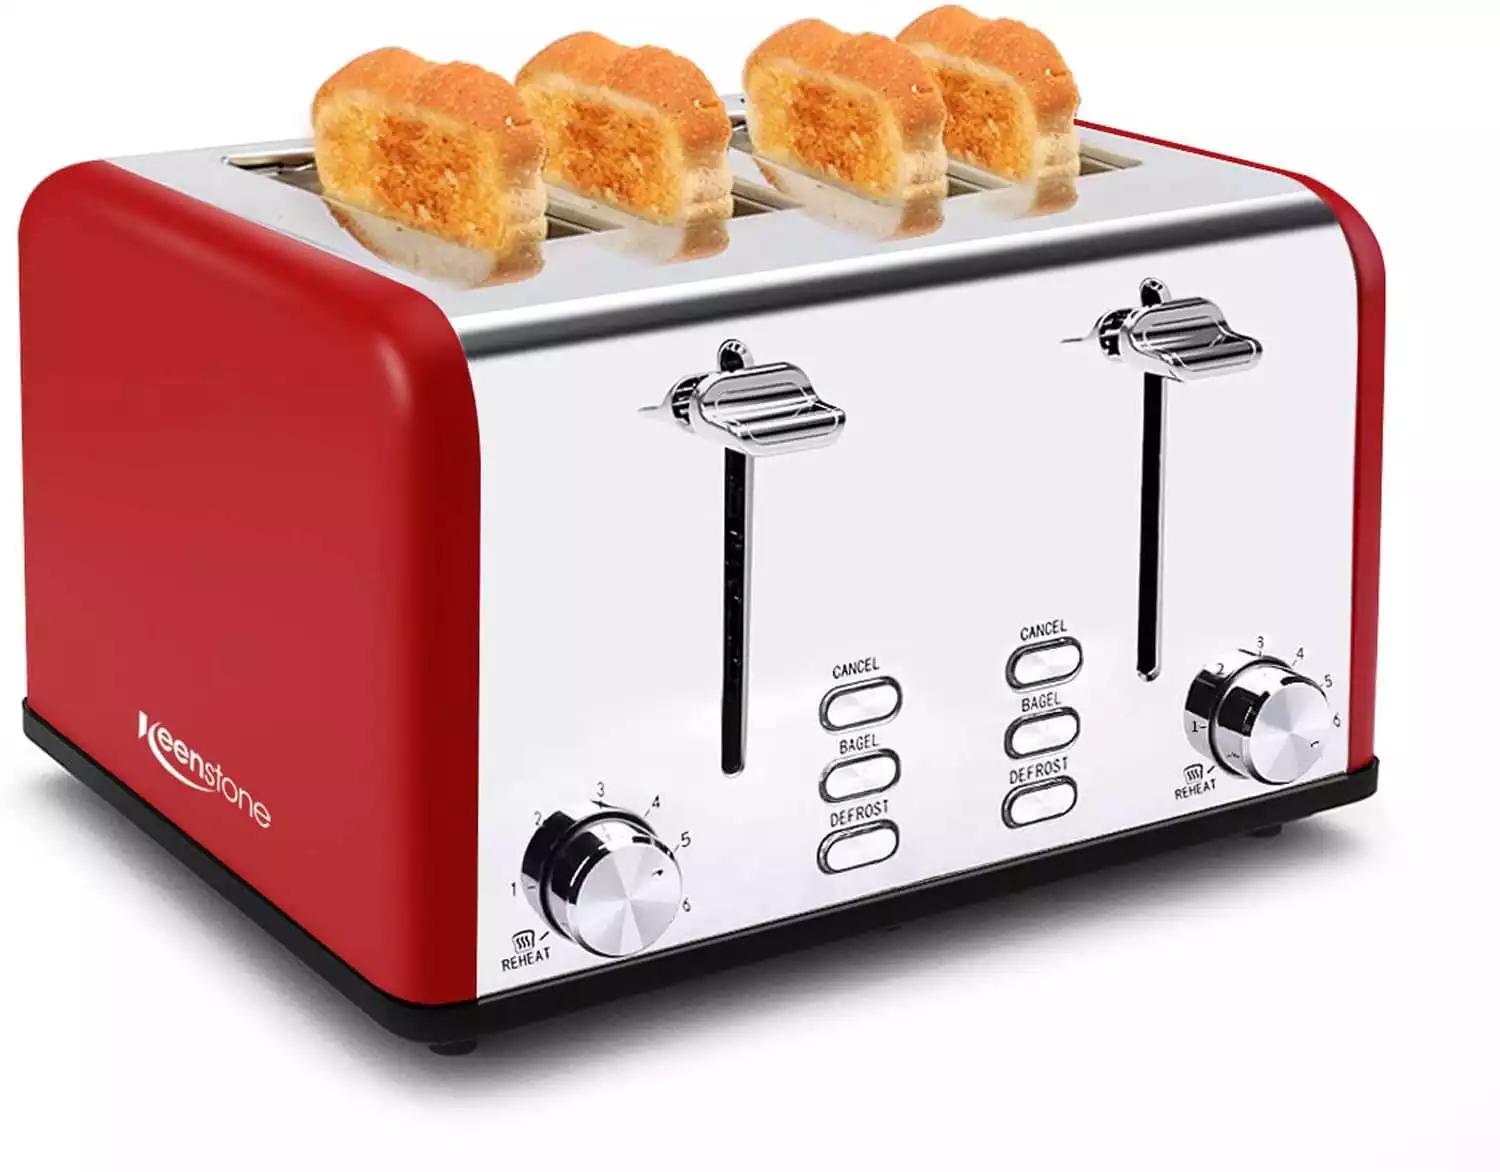 Keenstone Retro 2 Slice Toaster Stainless Steel Toaster Review 